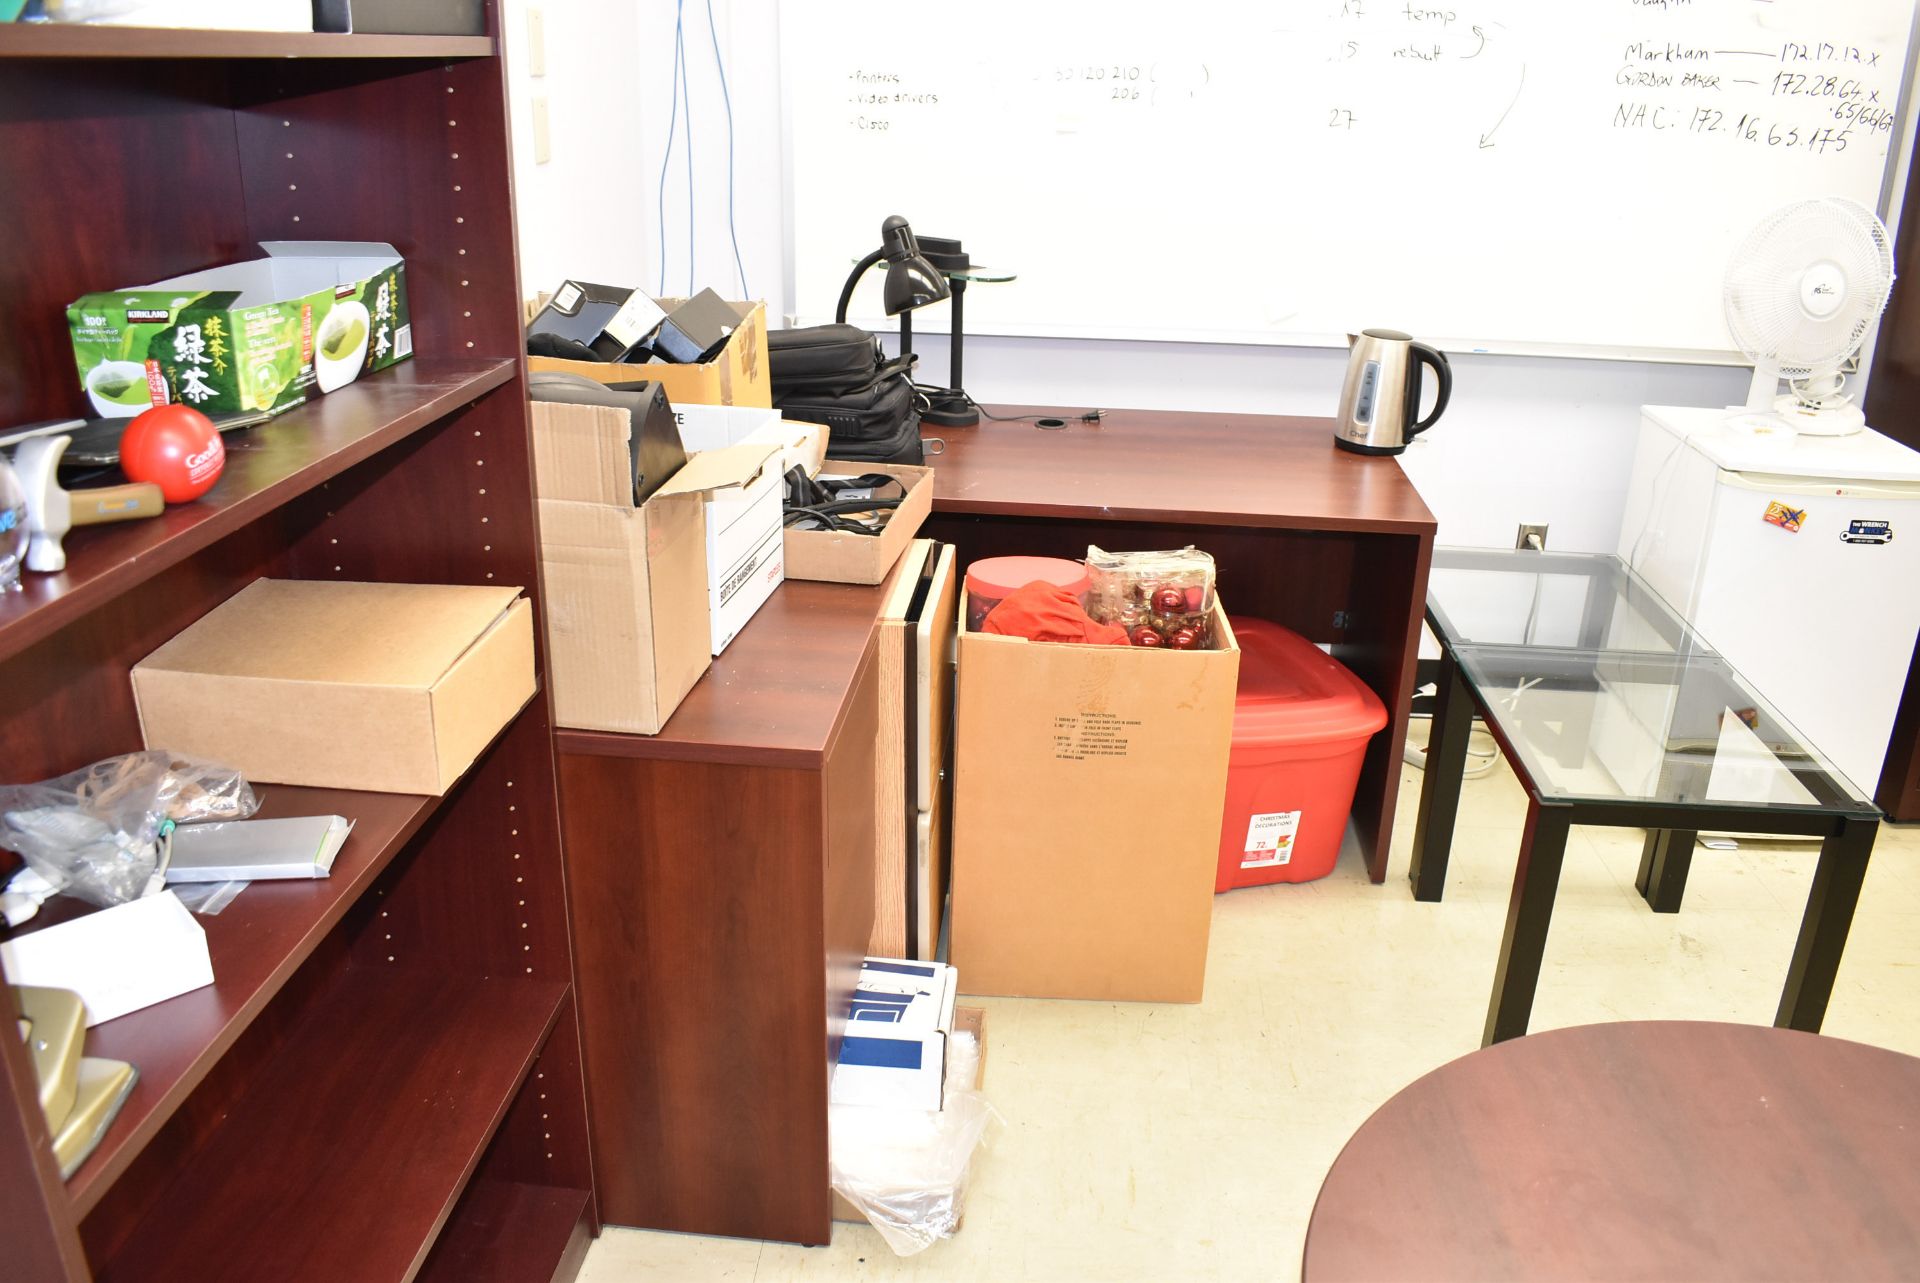 LOT/ CONTENTS OF OFFICE CONSISTING OF (2) DESKS WITH OFFICE CHAIR, 2-DRAWER LATERAL FILE CABINET, - Image 3 of 4